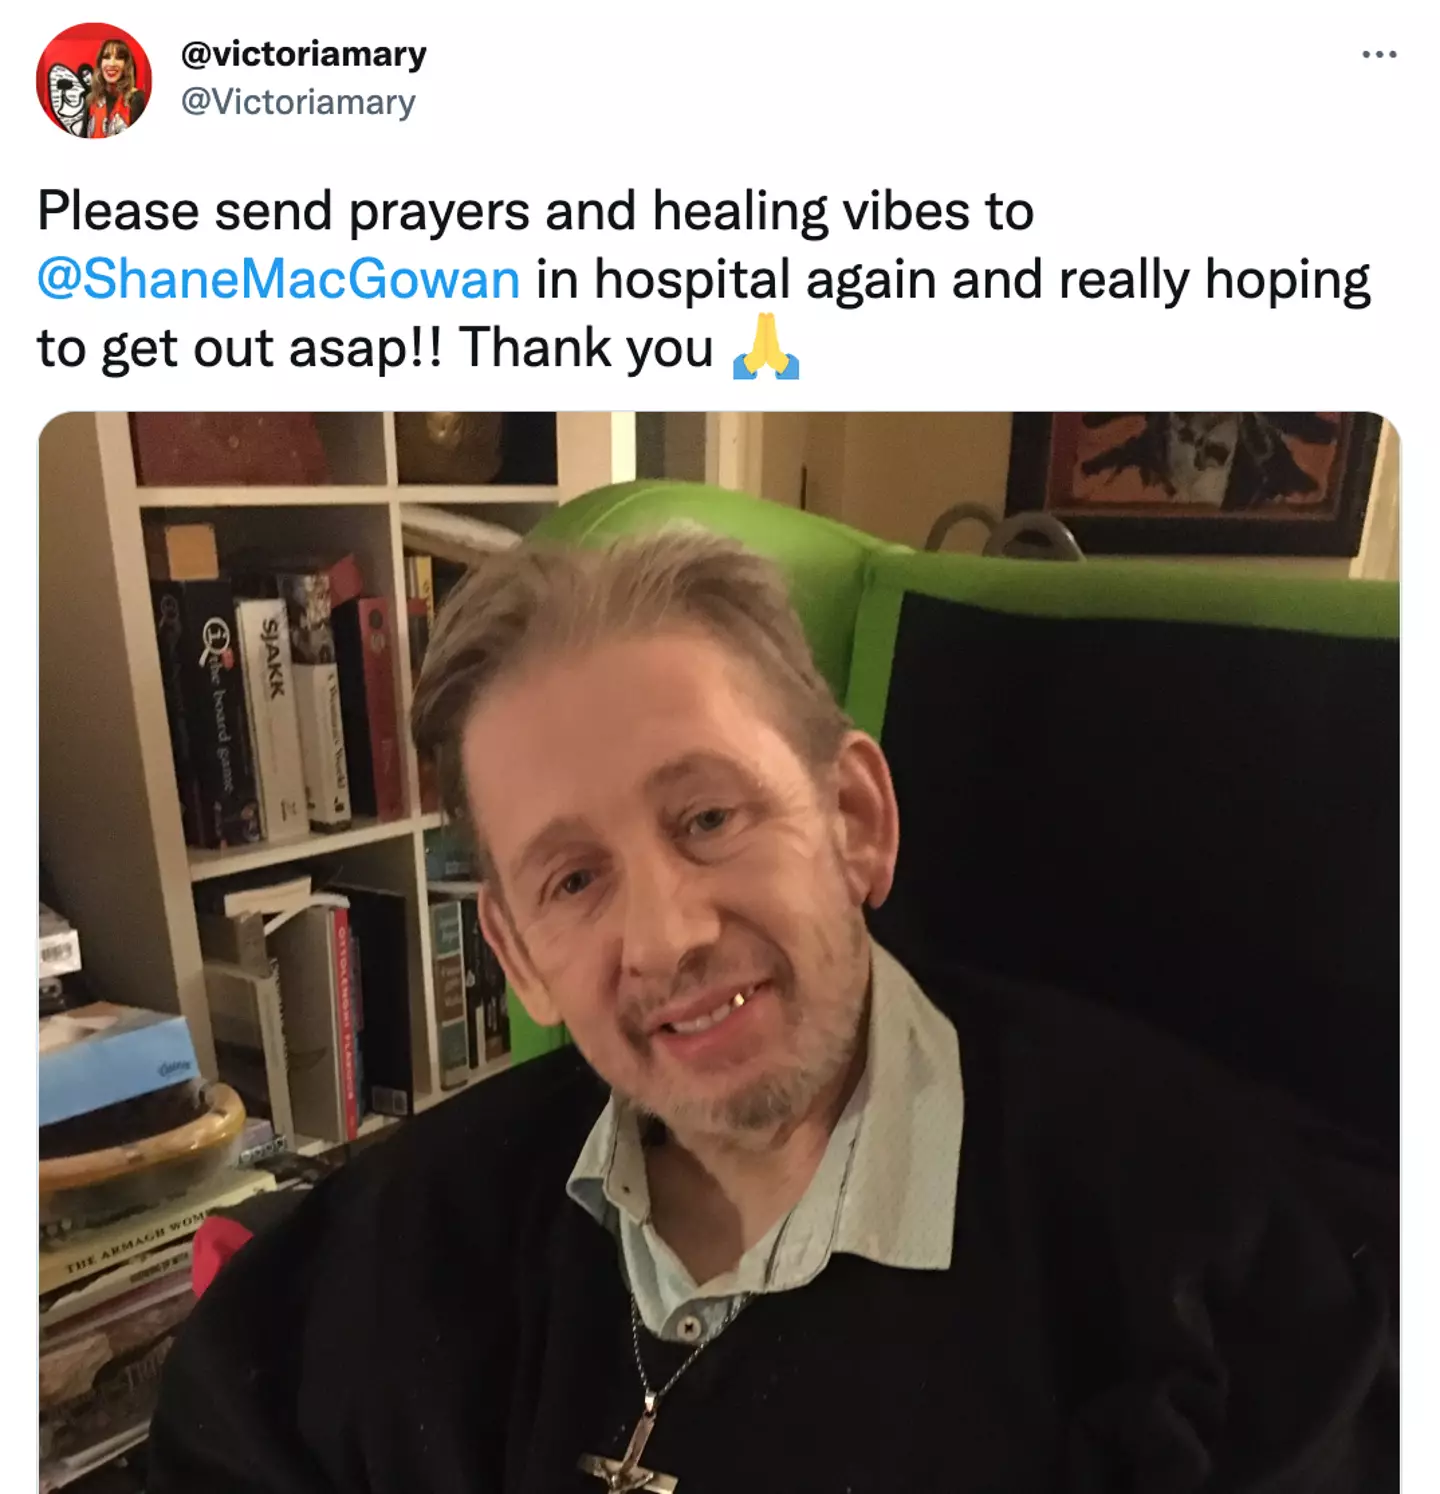 MacGowan was admitted to hospital at the start of December.